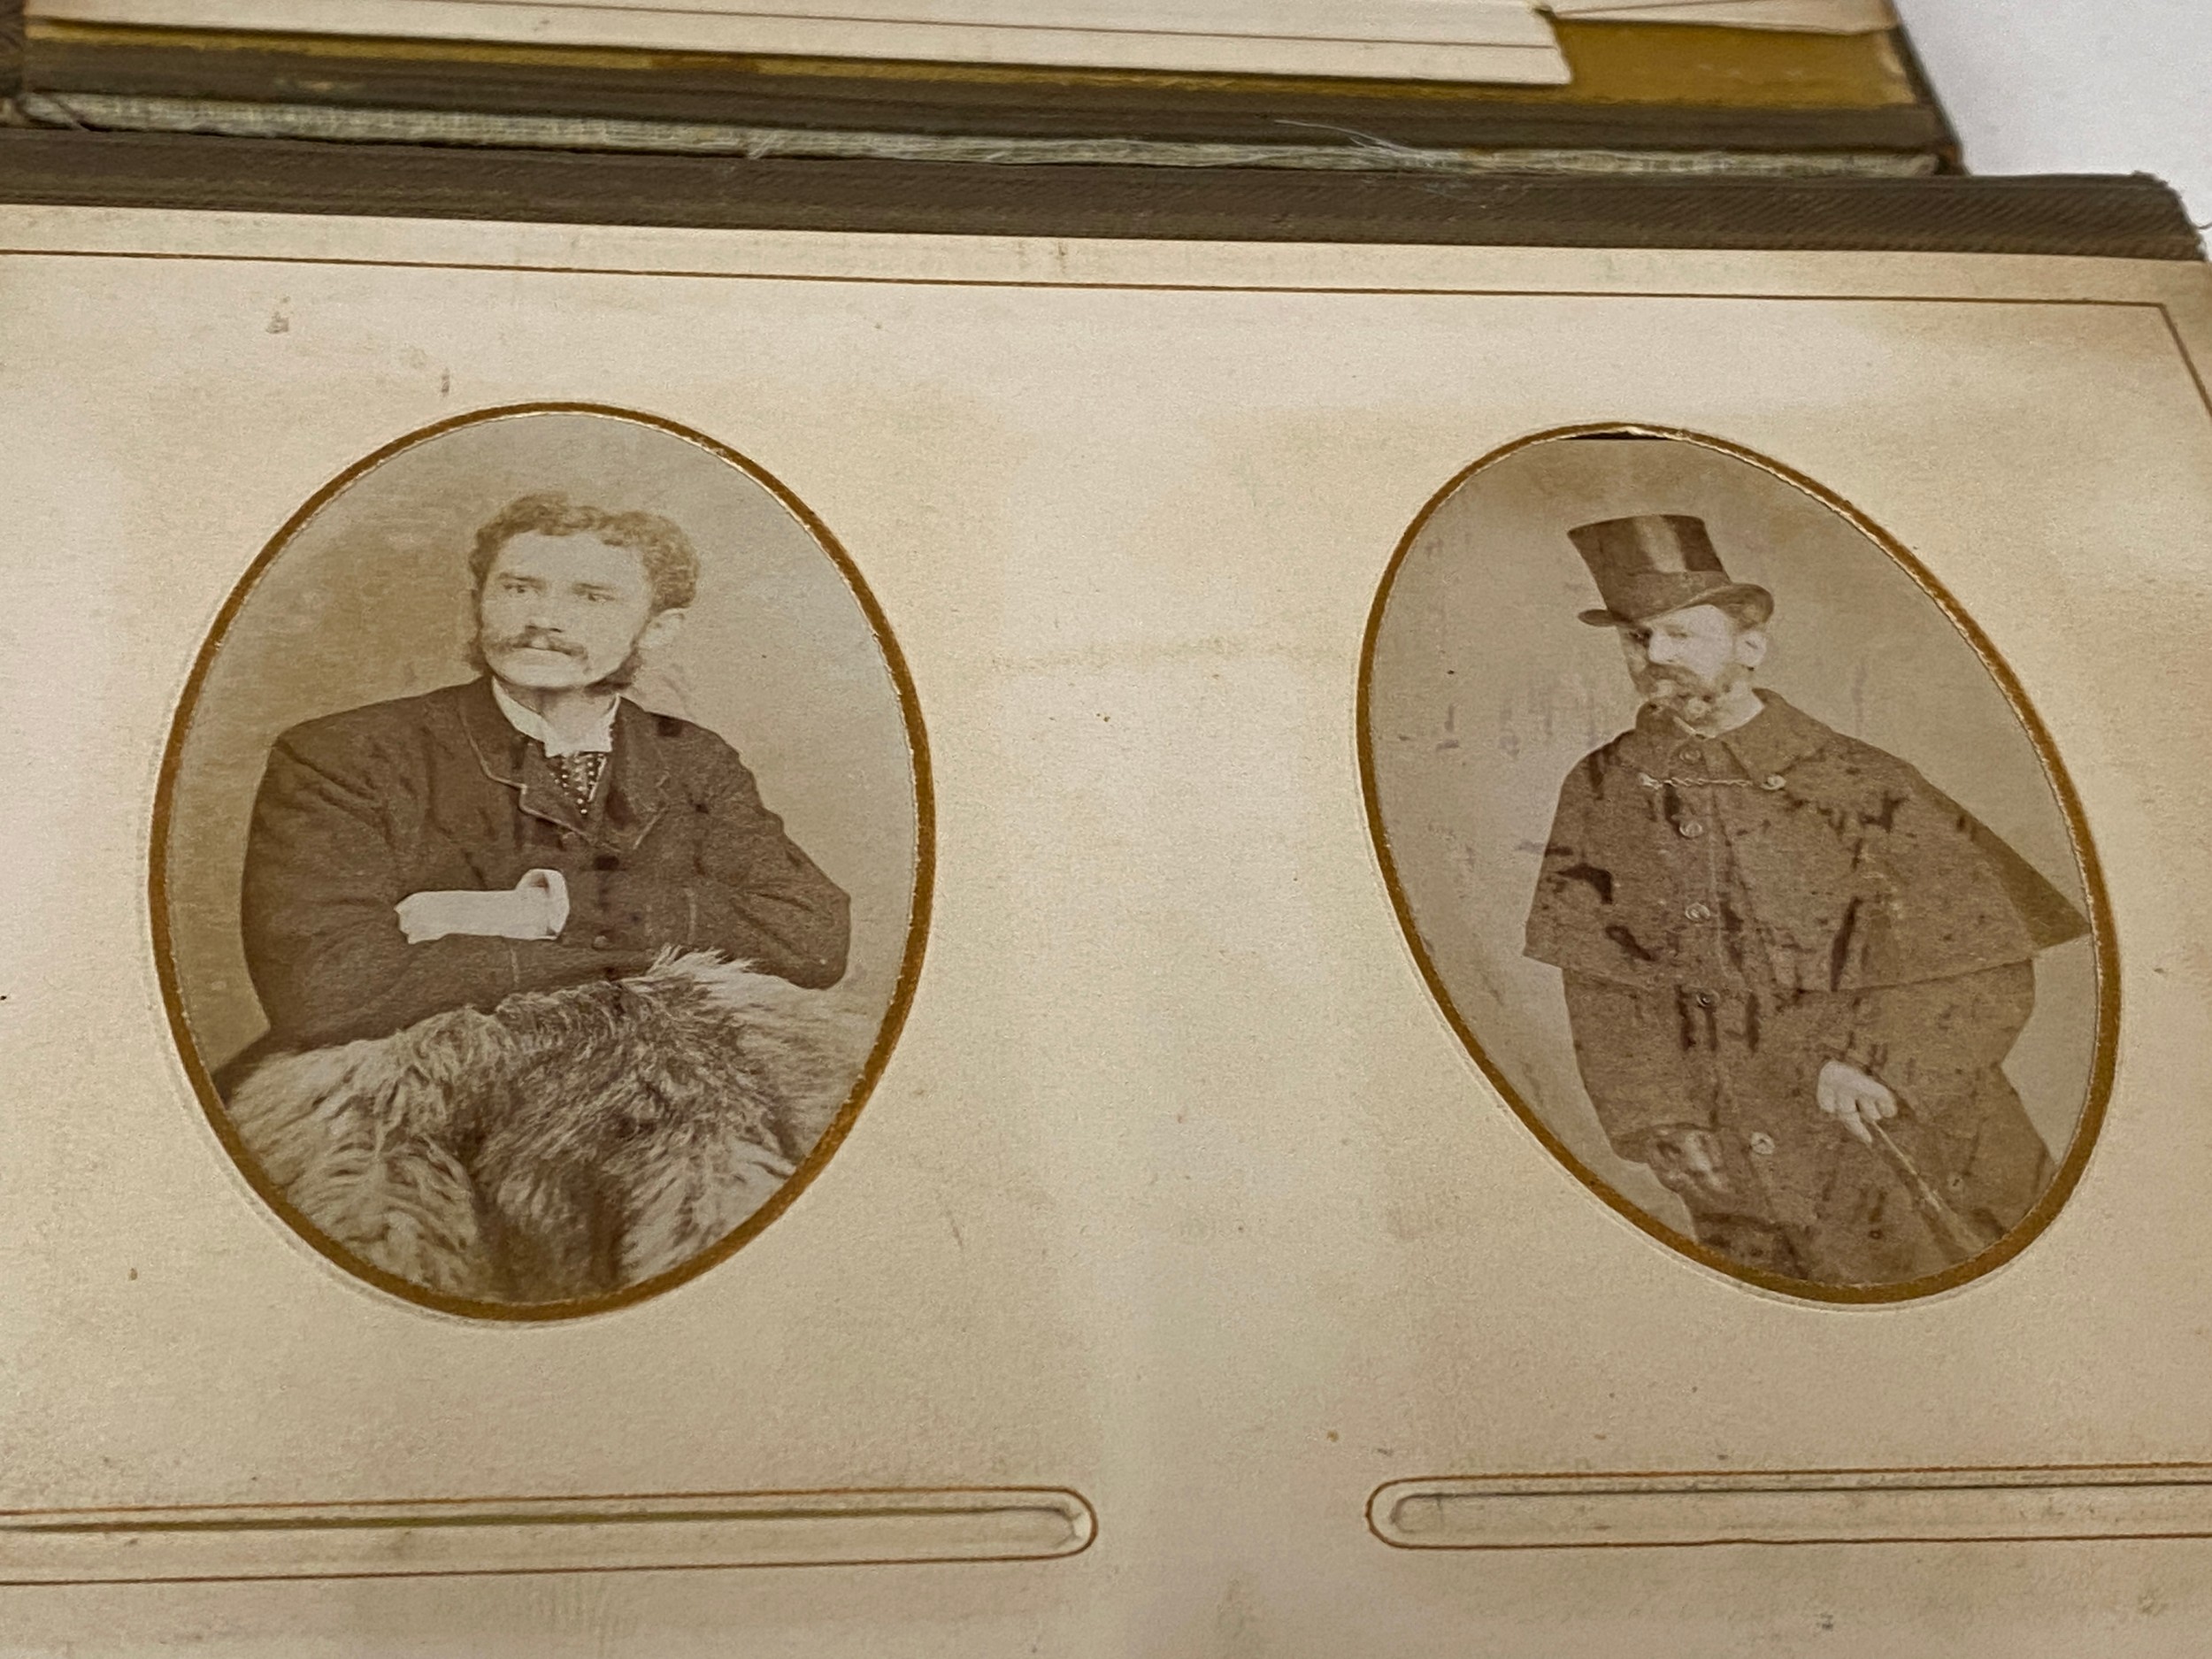 Photograph albums; Saltley College X'mas 1887 presented to Thomas Withers by his fellow students - Image 18 of 30